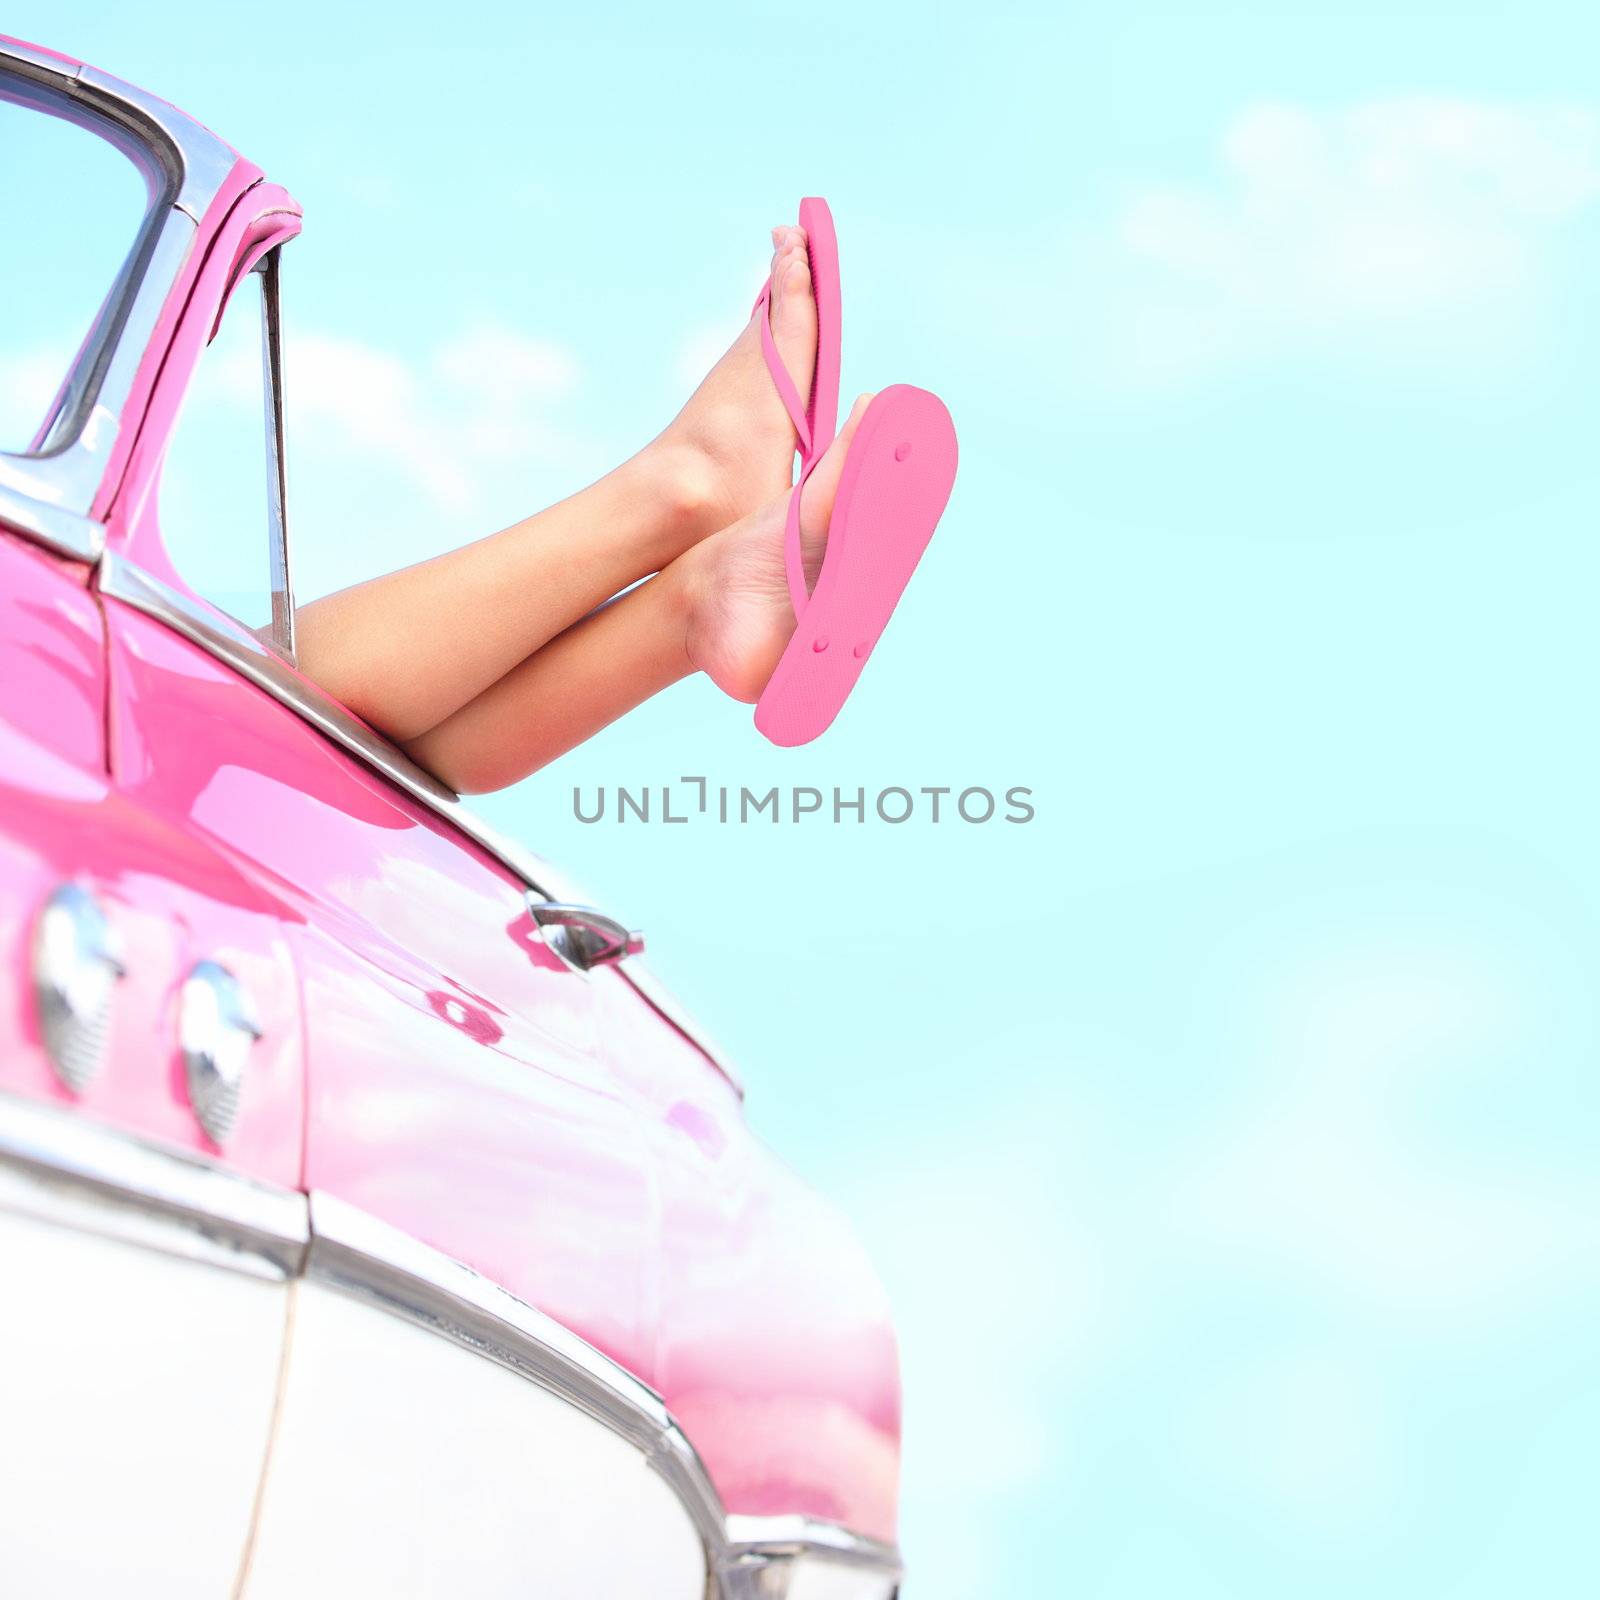 Summer fun vintage car. Legs showing from pink vintage retro car. Freedom, travel and vacation road trip concept lifestyle image with woman and copy space on blue sky.